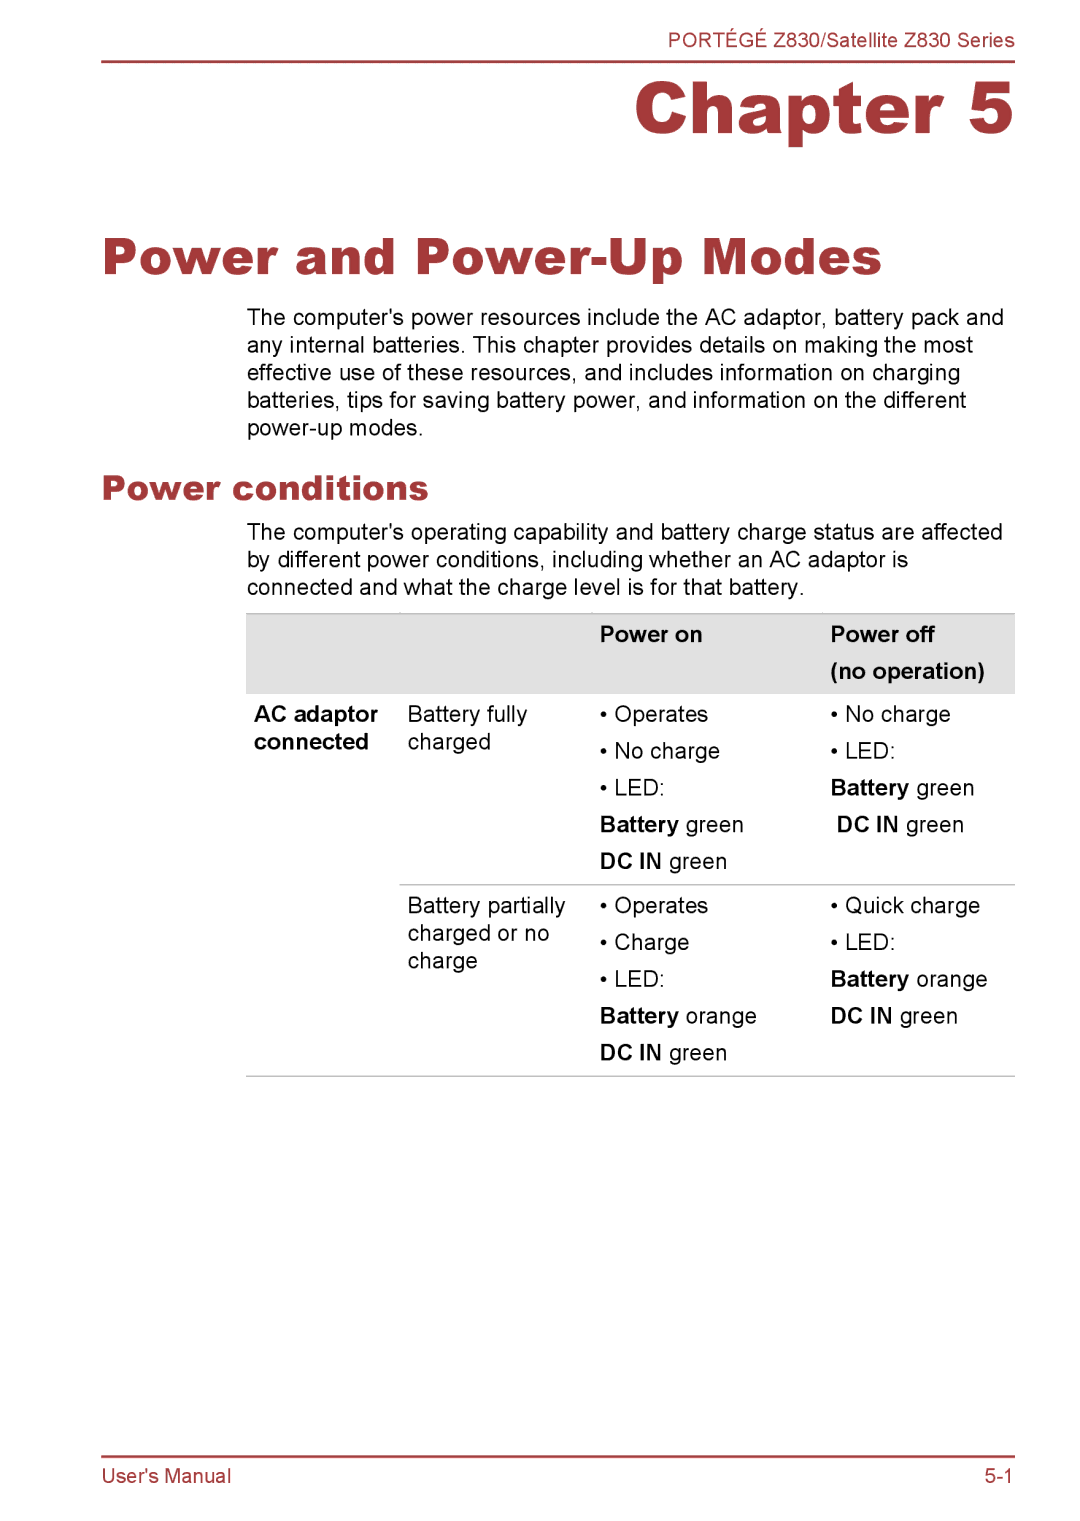 Toshiba Z830 user manual Power and Power-Up Modes, Power conditions 